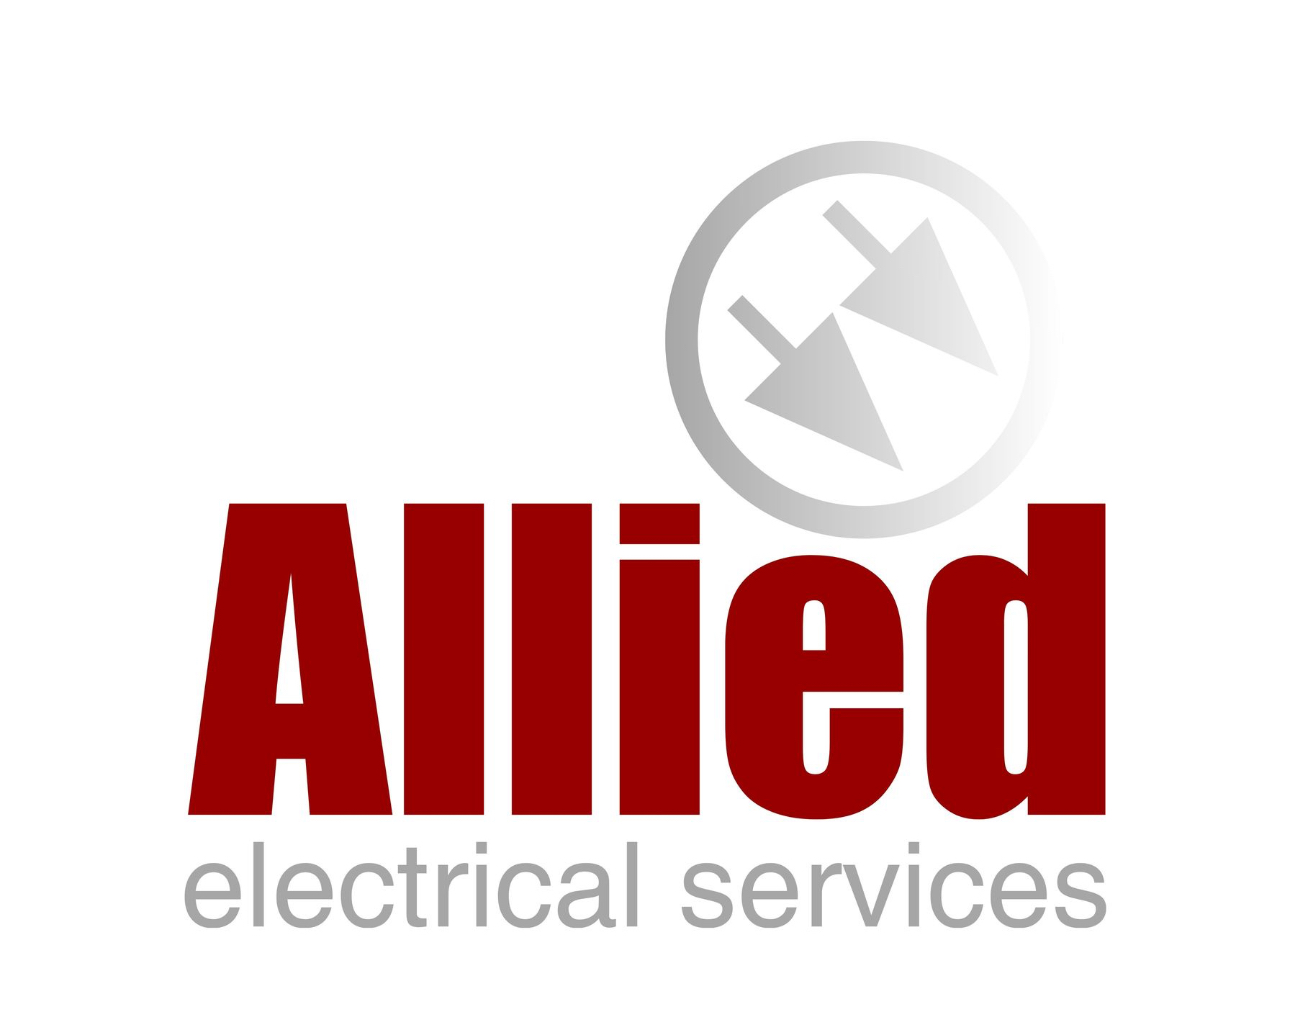 Allied Electrical Services Bristol Logo